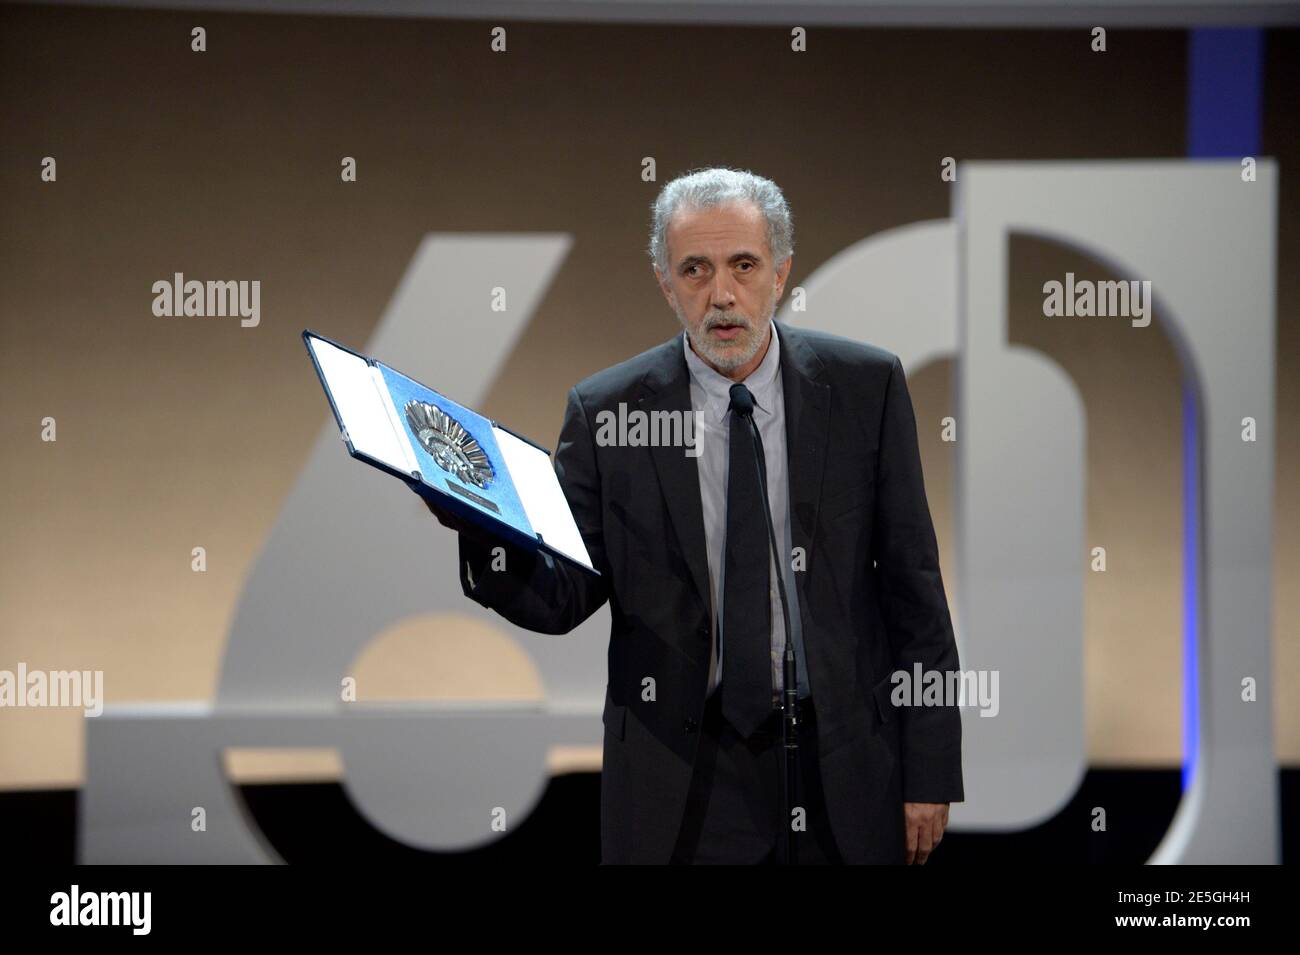 Spanish director Fernando Trueba holds up the Concha de Plata (Silver Shell) award for Best Director for his film 'El Artista Y La Modelo' (The artist and the model) during the awards ceremony at the Kursaal Centre on the final day of the 60th San Sebastian Film Festival September 29, 2012. REUTERS/Vincent West (SPAIN - Tags: ENTERTAINMENT) Stock Photo